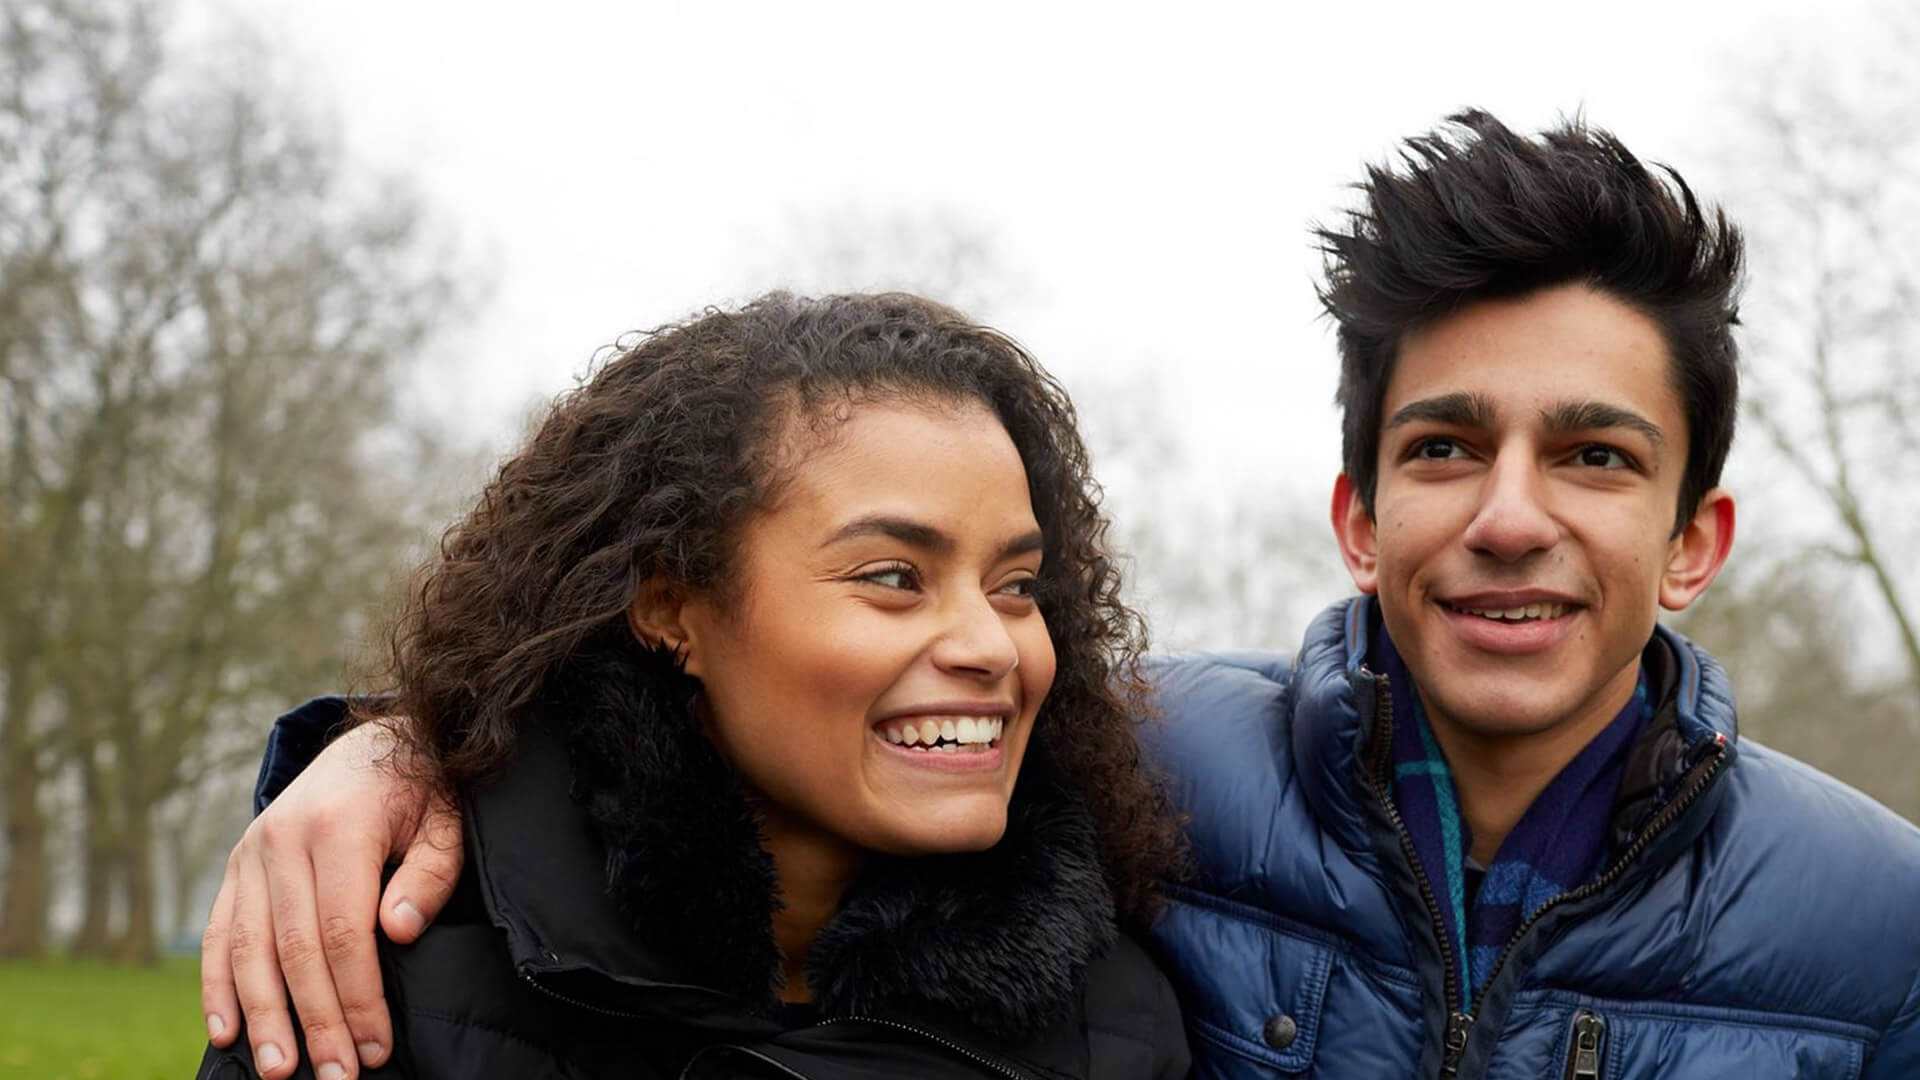 close-up-of-a-young-boy-in-blue-jacket-smiling-while-his-hands-wrap-around-the-shoulder-of-a-girl-with-curly-hair-smiling-while-looking-away